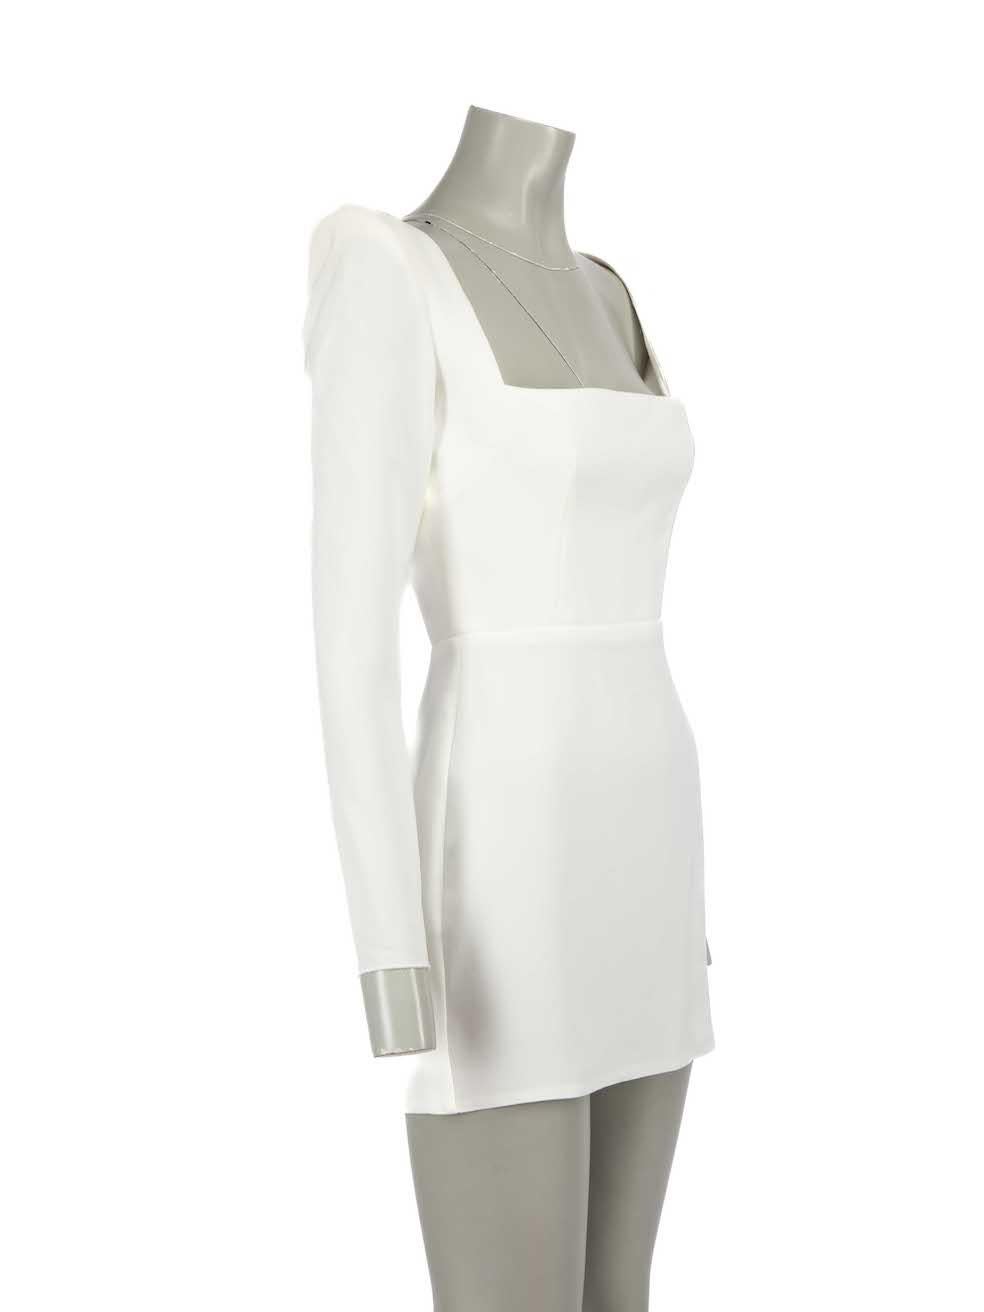 CONDITION is Never worn, with tags. No visible wear to dress is evident on this new Alex Perry designer resale item.
 
Details
Aaron
White
Polyester
Dress
Square neck
Long sleeves
Zipped cuffs
Mini
Shoulder pads
Back open ended double zip fastening
